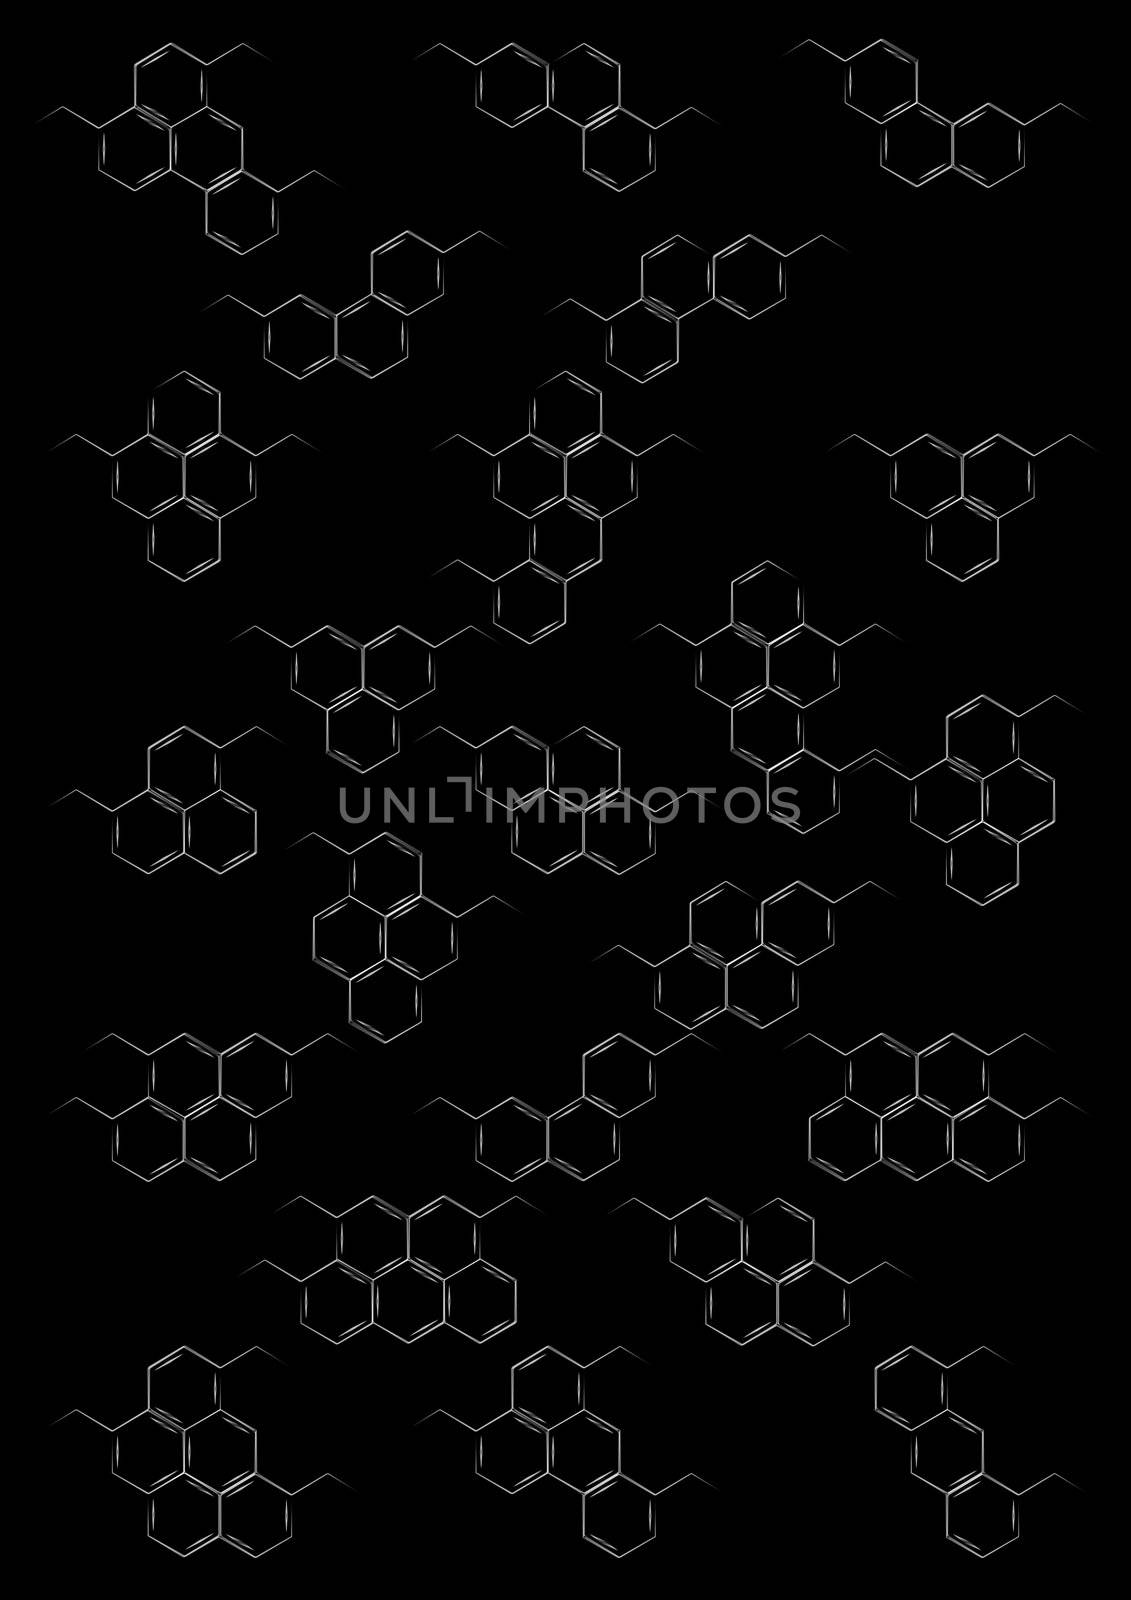 Blackboard with structural chemical formulas by richter1910